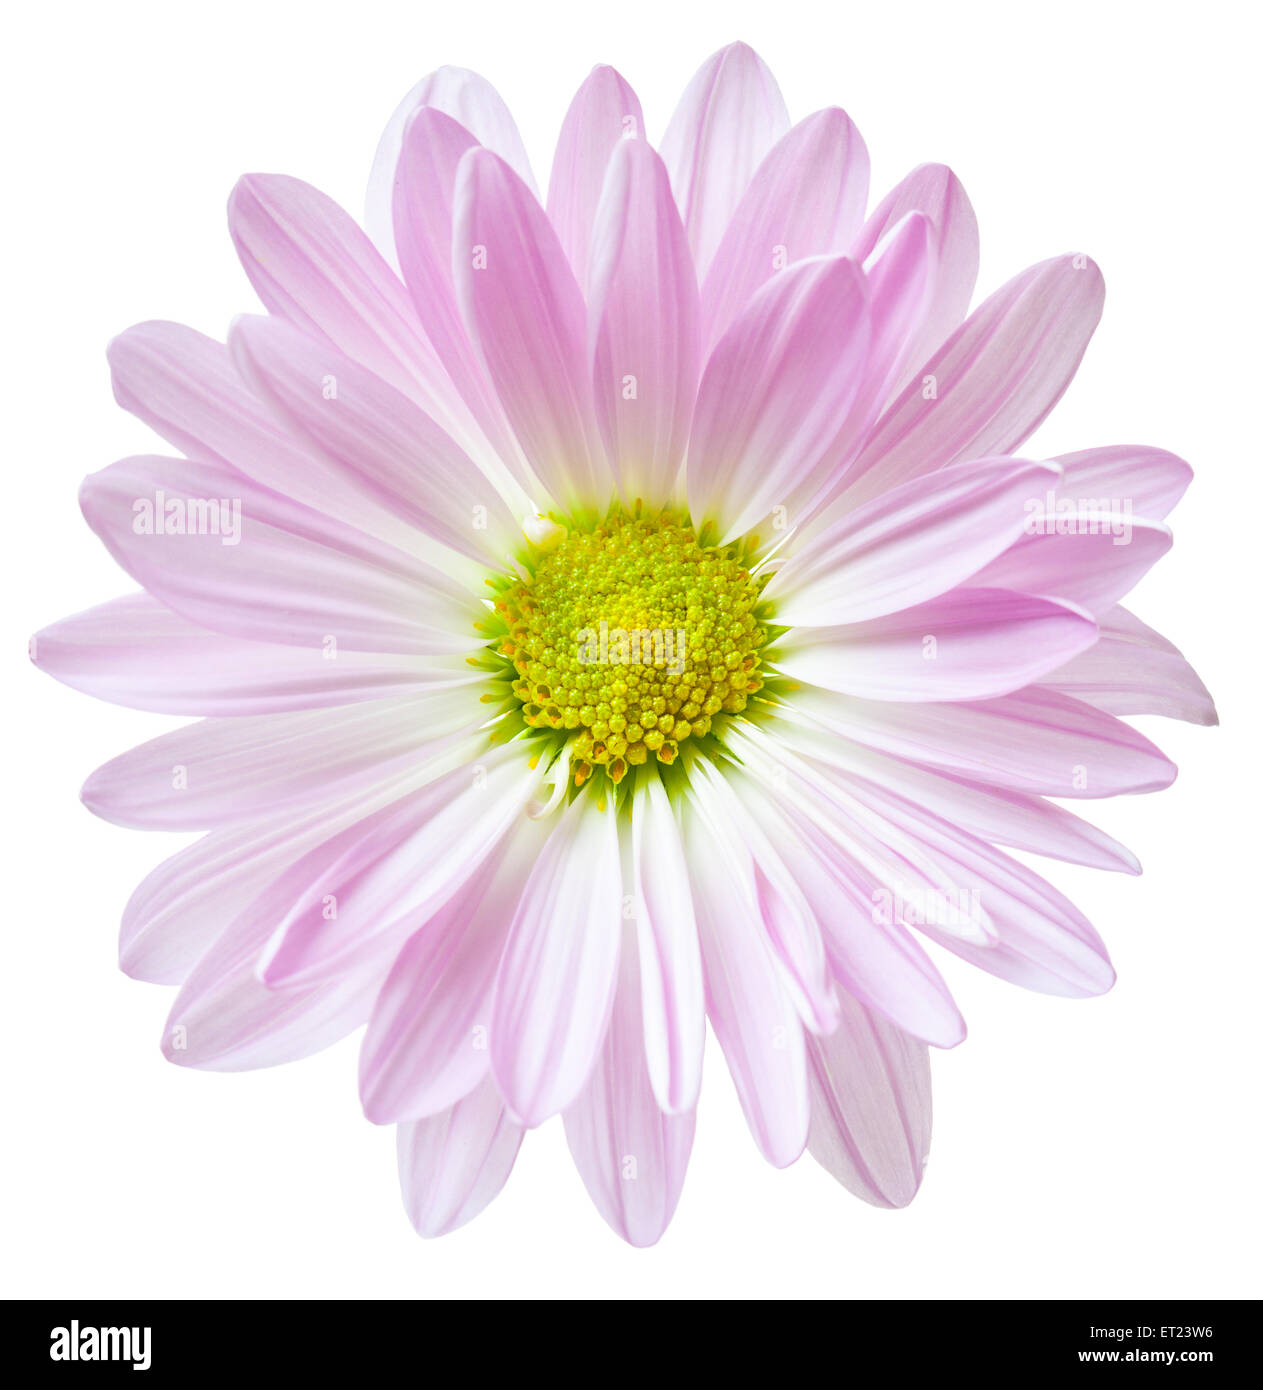 Daisy Flower Pink White Yellow Daisies Blossom Floral Flowers Isolated Stock Photo